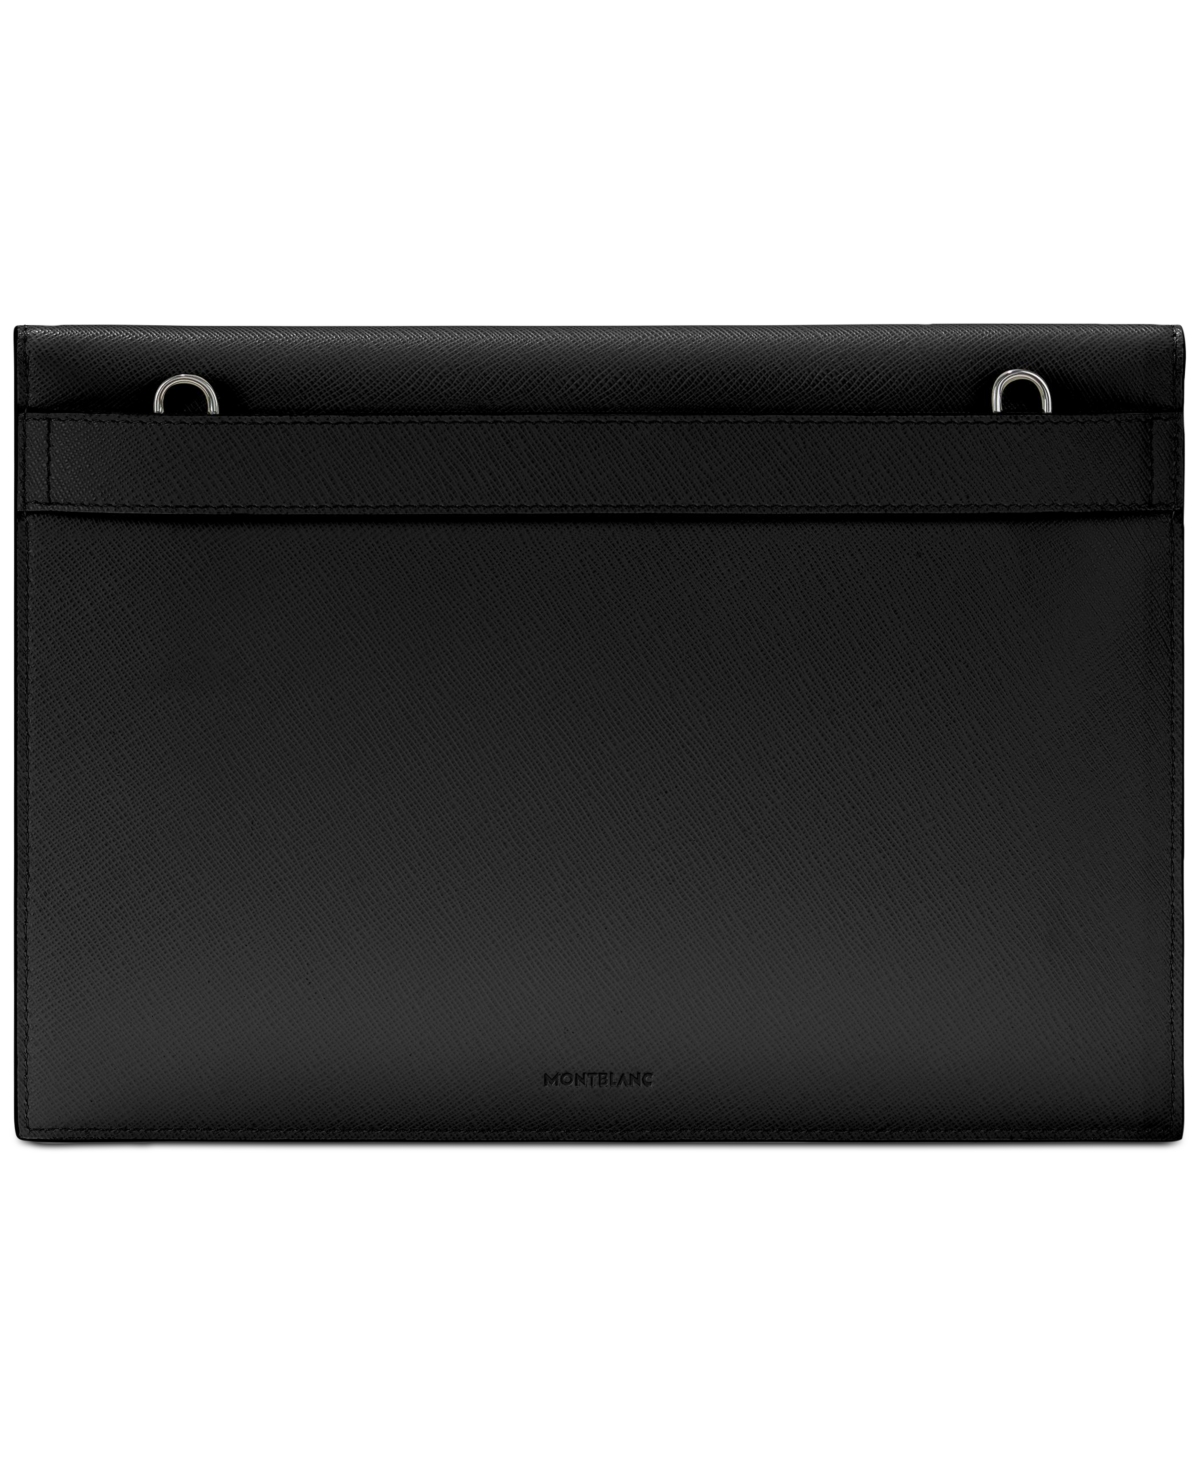 Shop Montblanc Sartorial Leather Envelope Pouch In Black